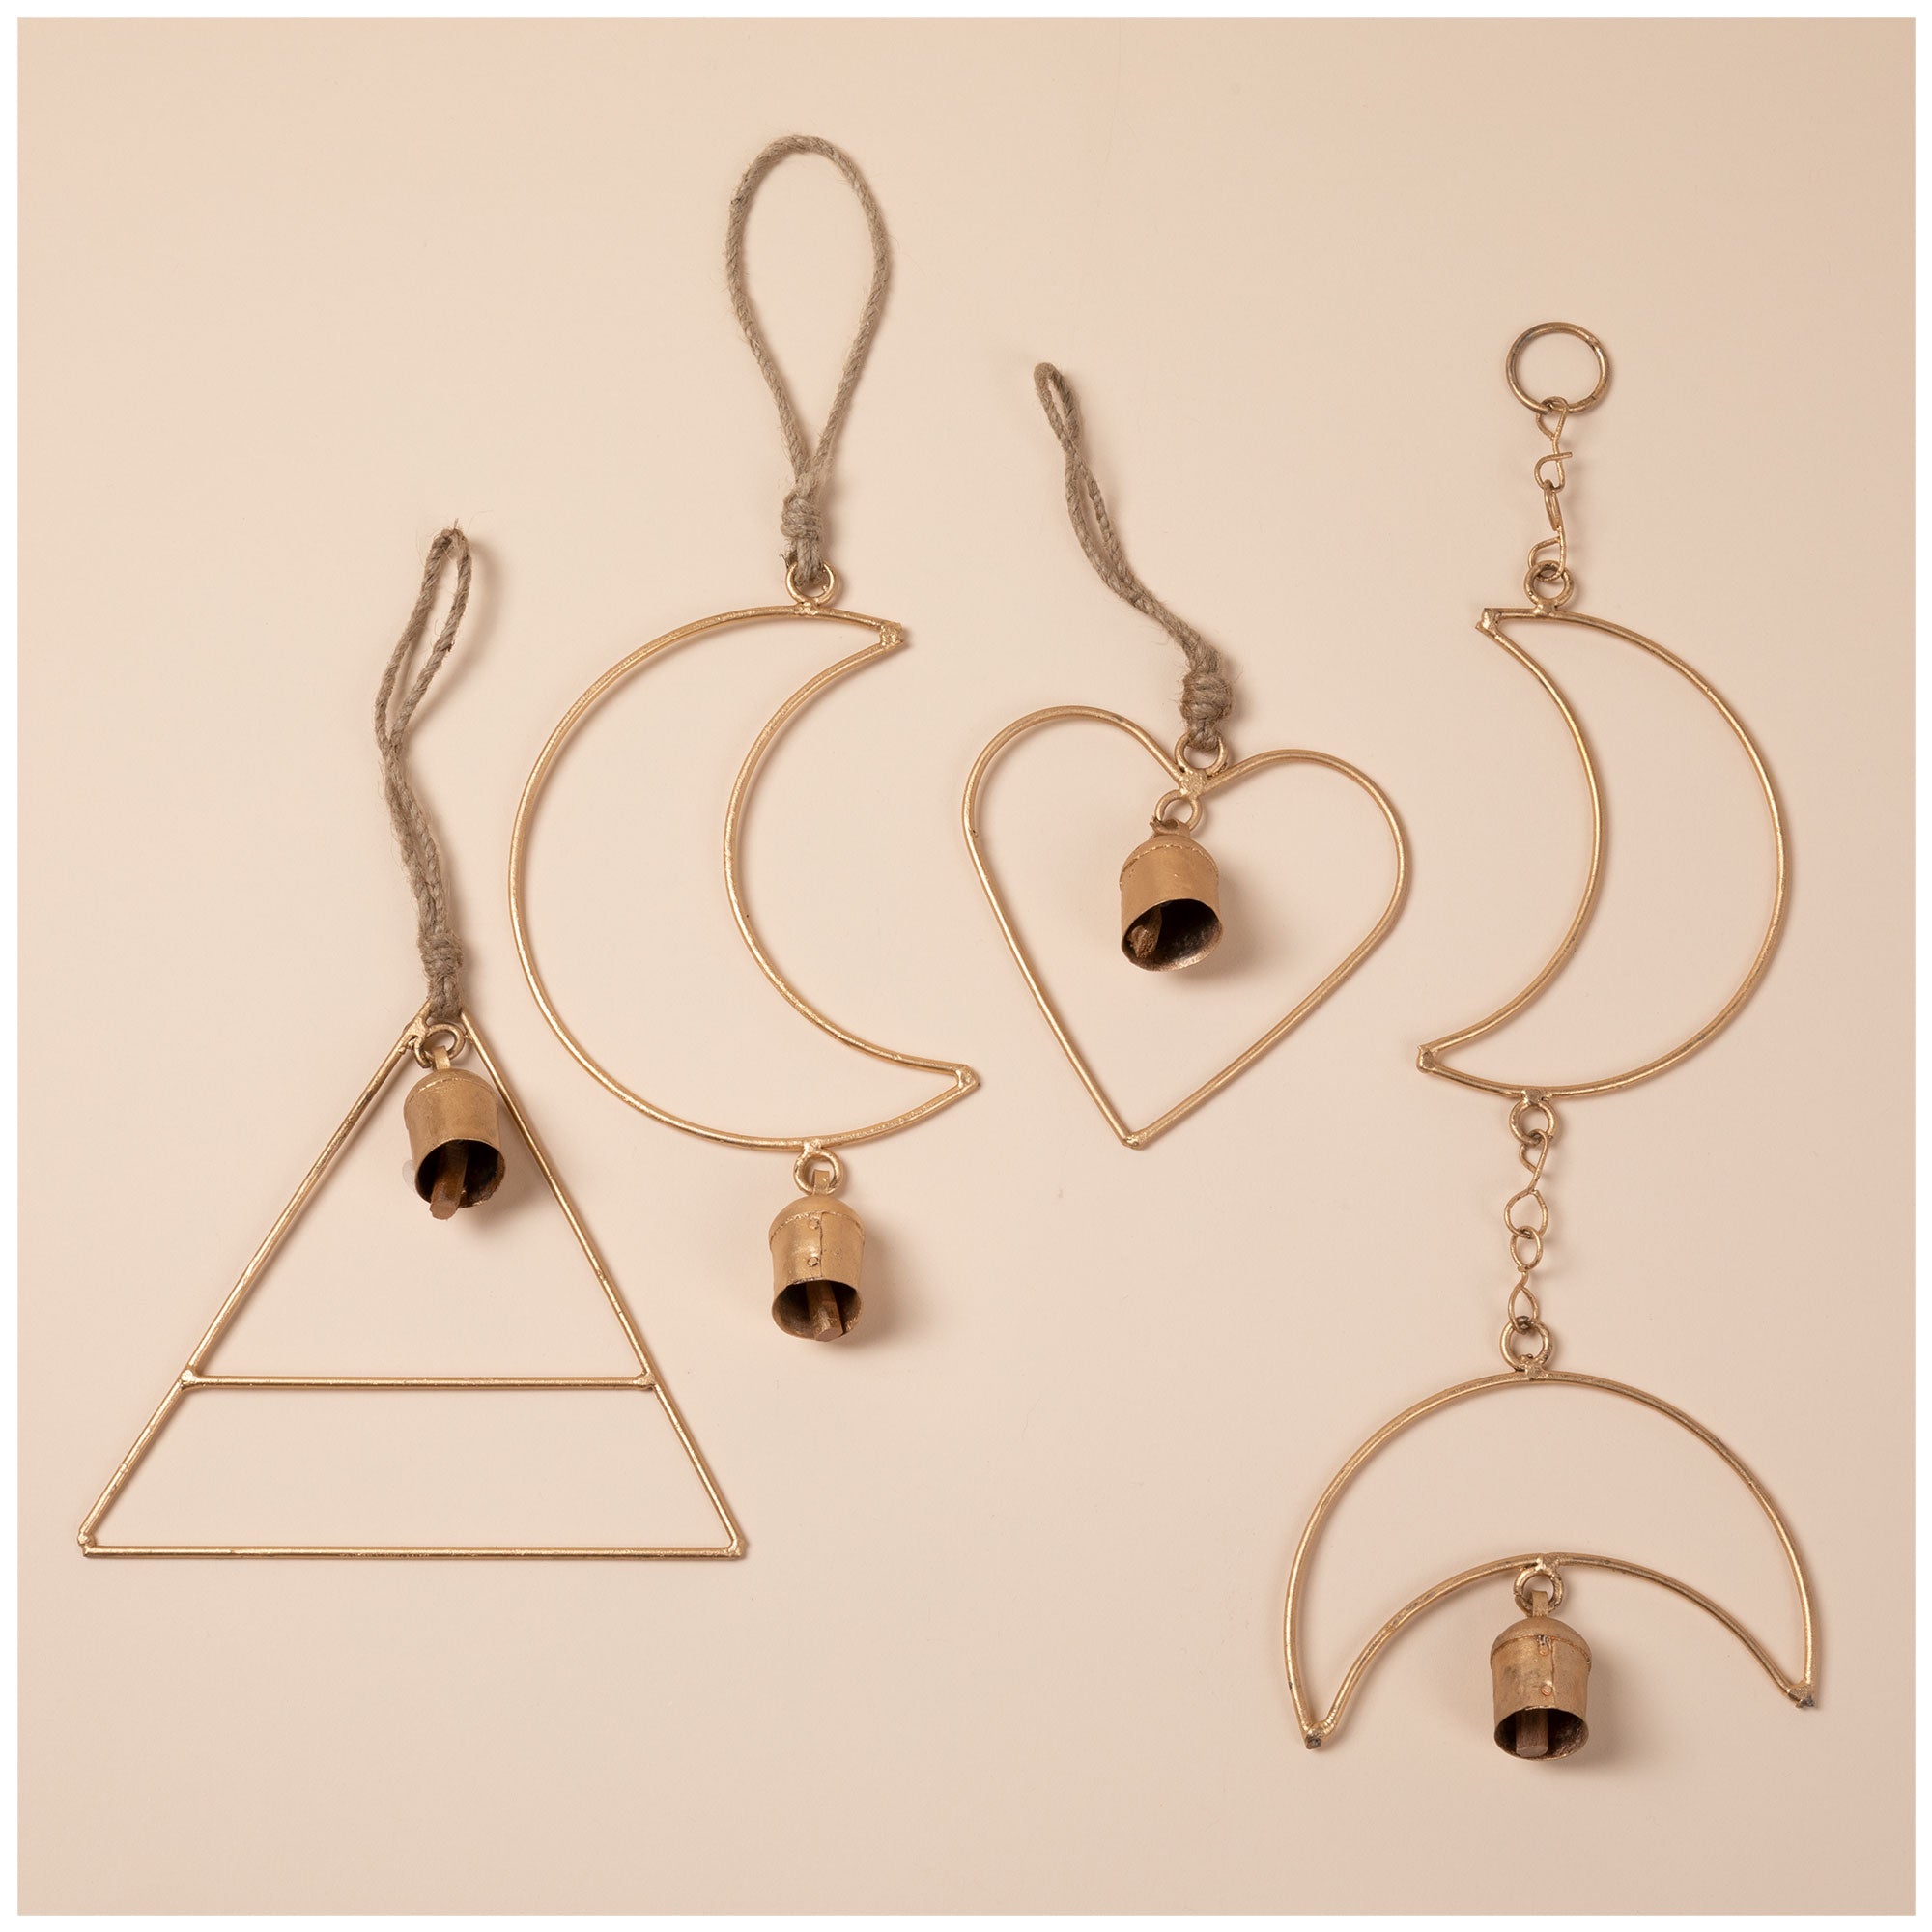 Single Bell Iron Wind Chime - Moon